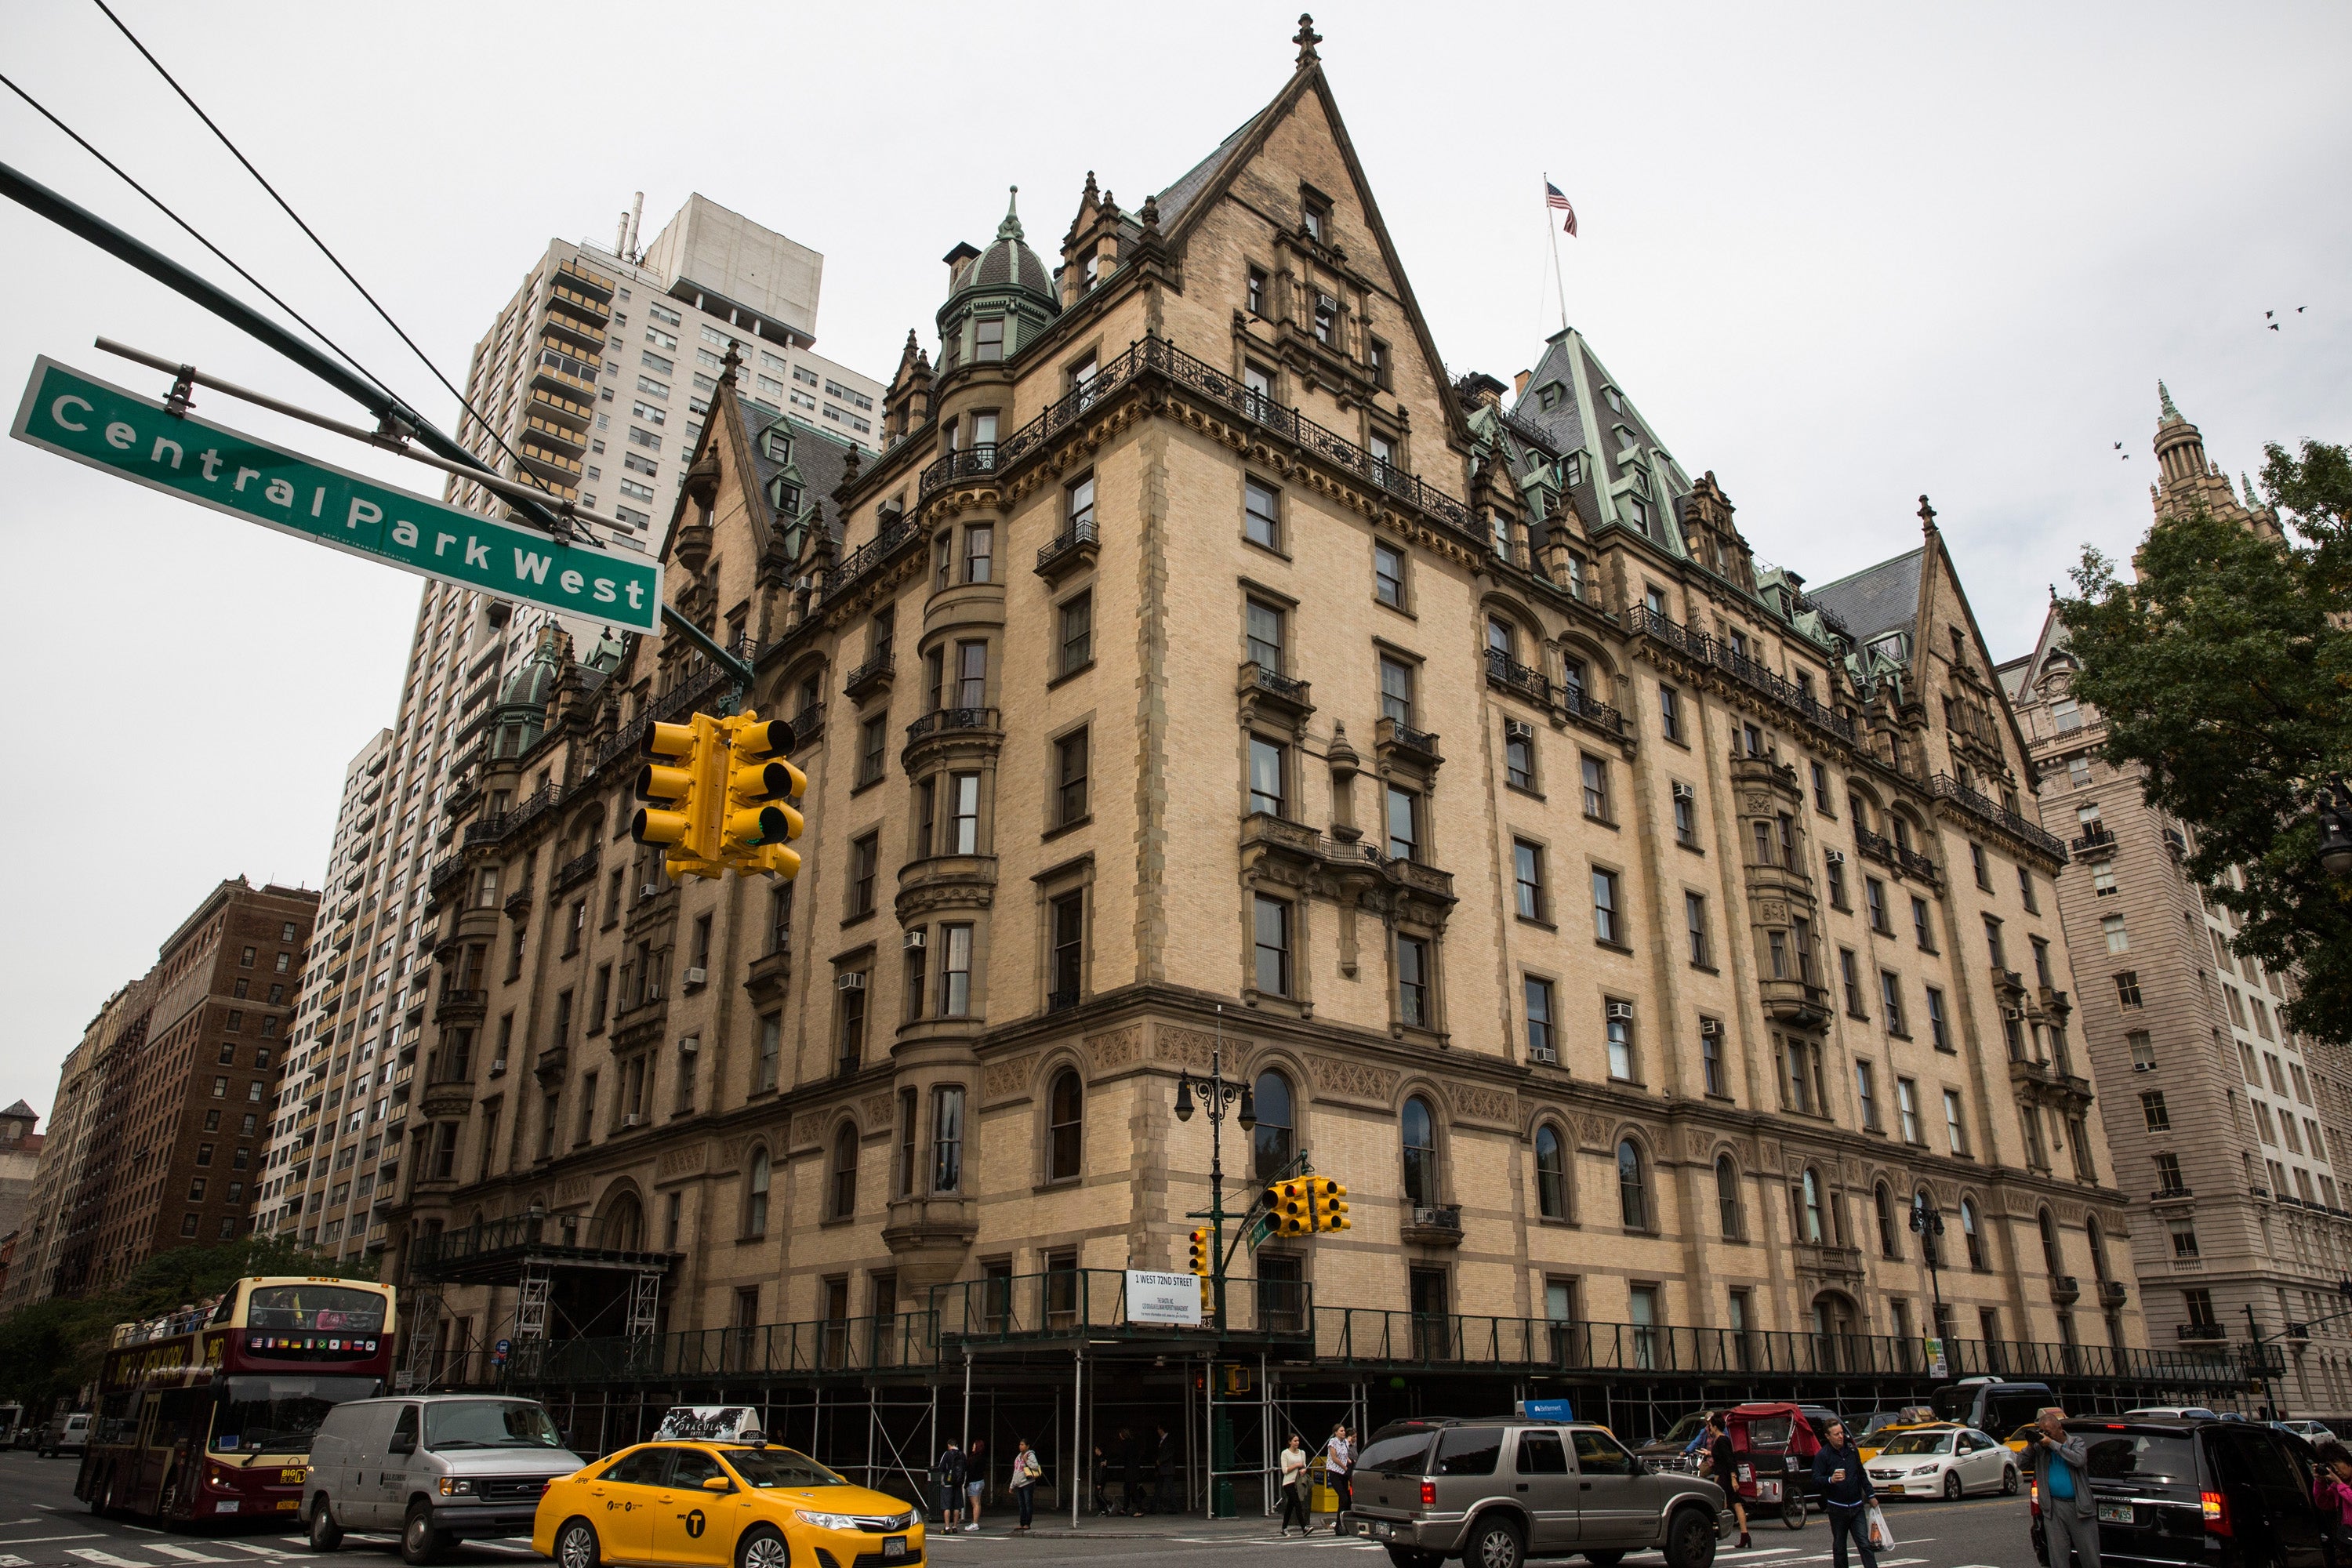 The Dakota, the New York City building John Lennon lived in and was murdered outside of